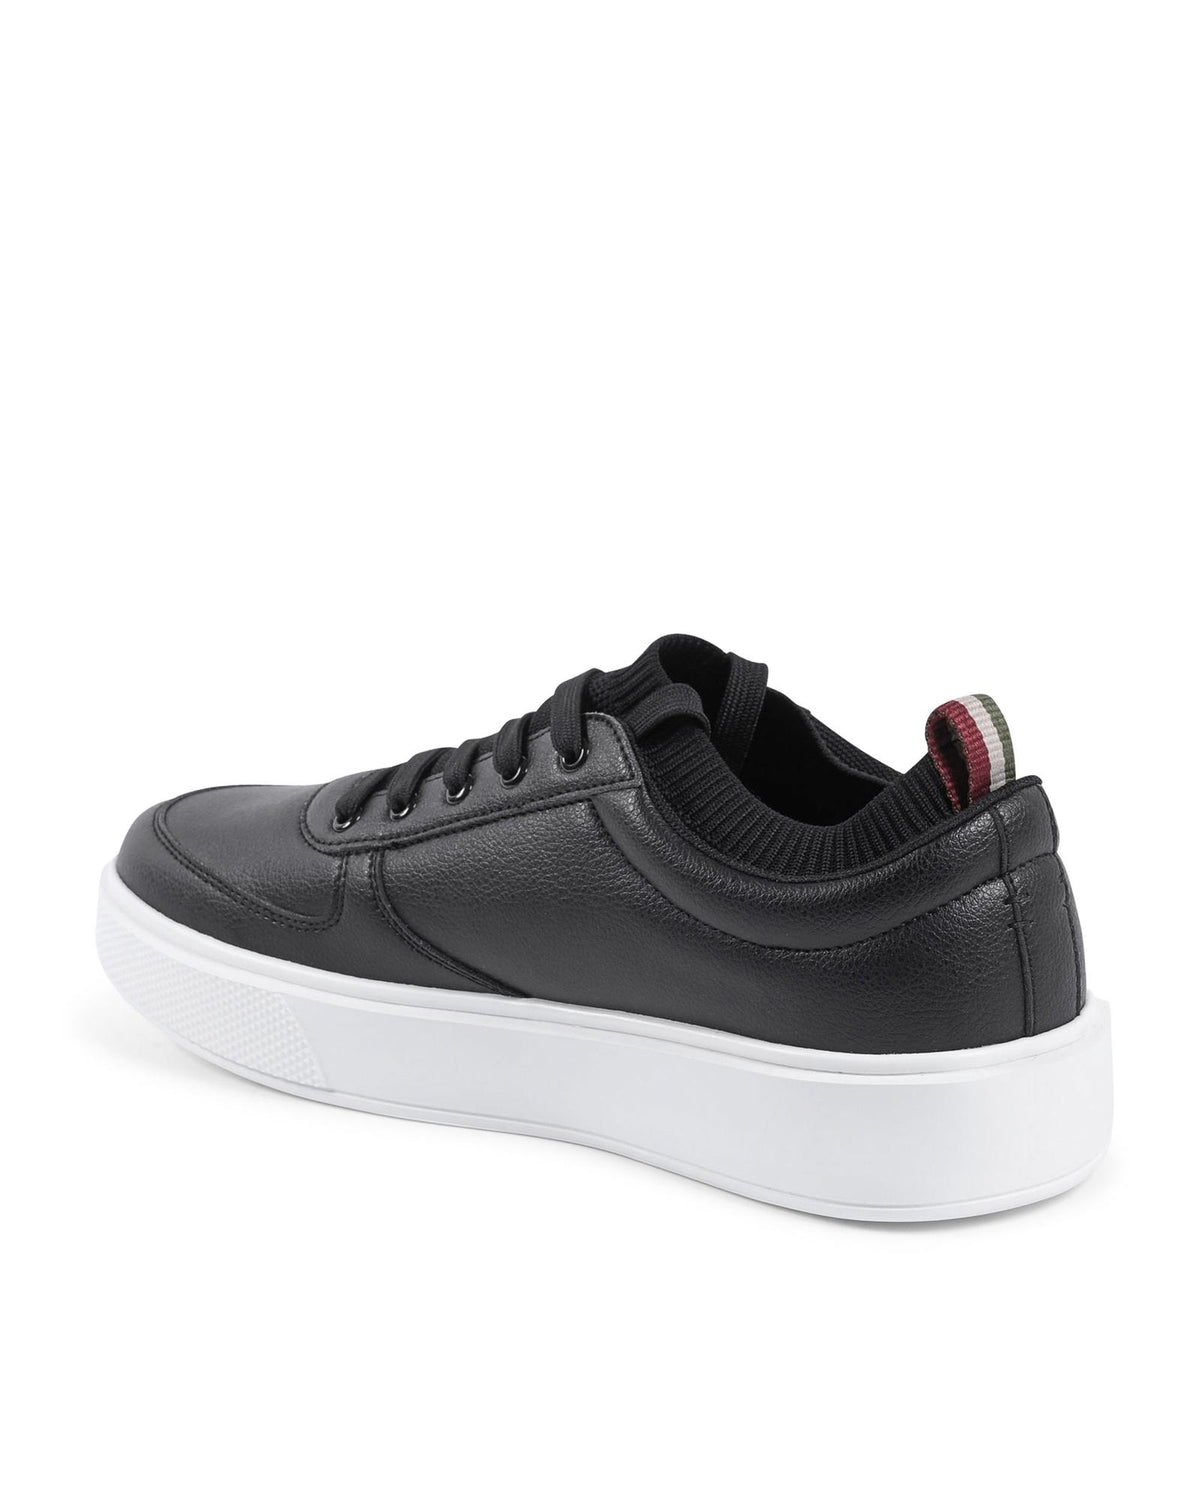 Synthetic Leather Sneaker with Rubber Sole - 45 EU